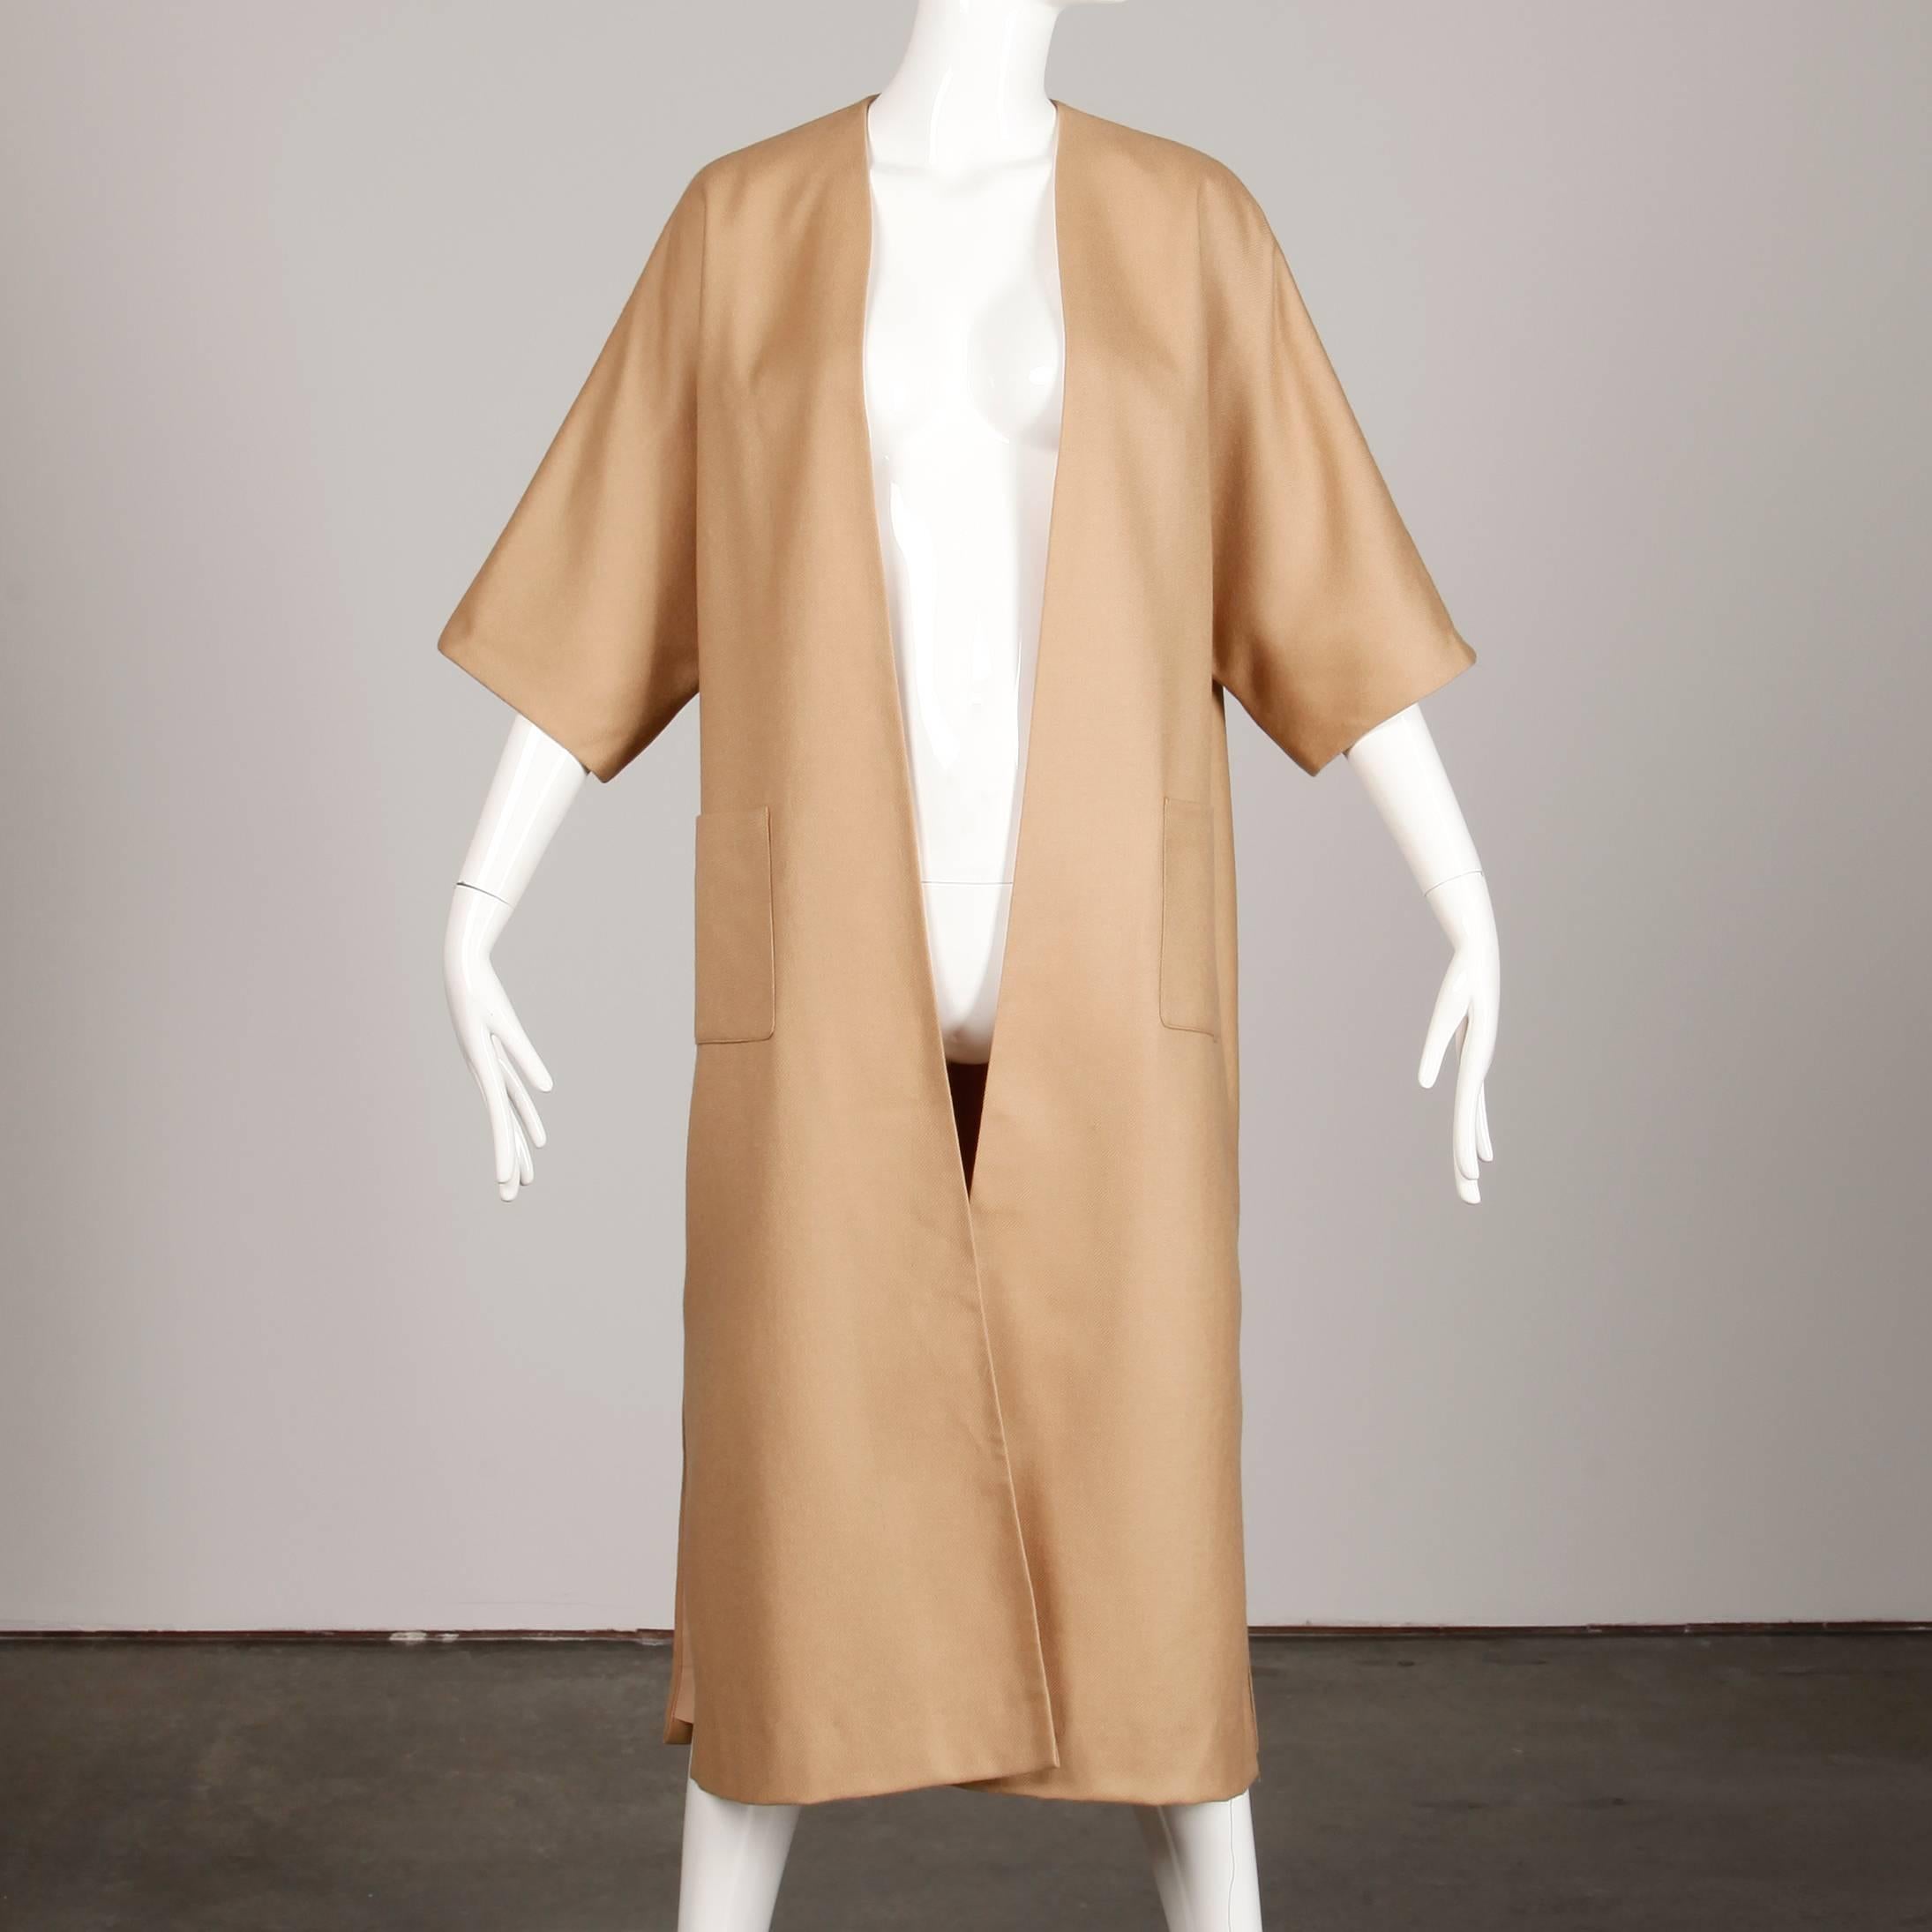 Brown Unworn with Tags 1970s Vintage Camel Wool Maxi Coat or Duster with 3/4 Sleeves